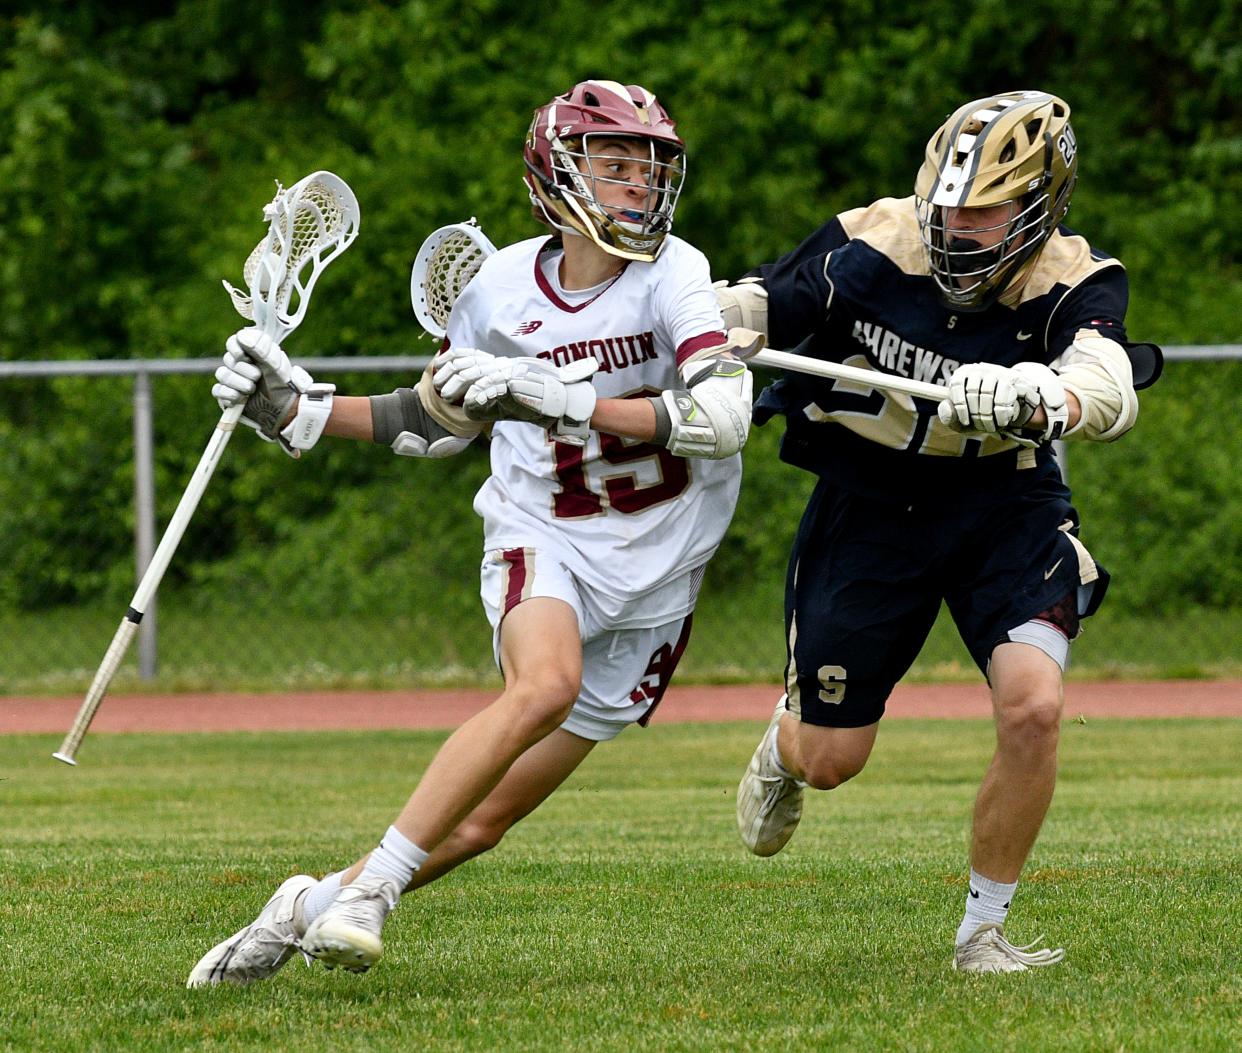 Algonquin's Benjamin Yosca tries to stay clear of Jake Mullholland during a CMADA Class A boys' lacrosse semifinal between Algonquin and Shrewsbury at Algonquin Regional.